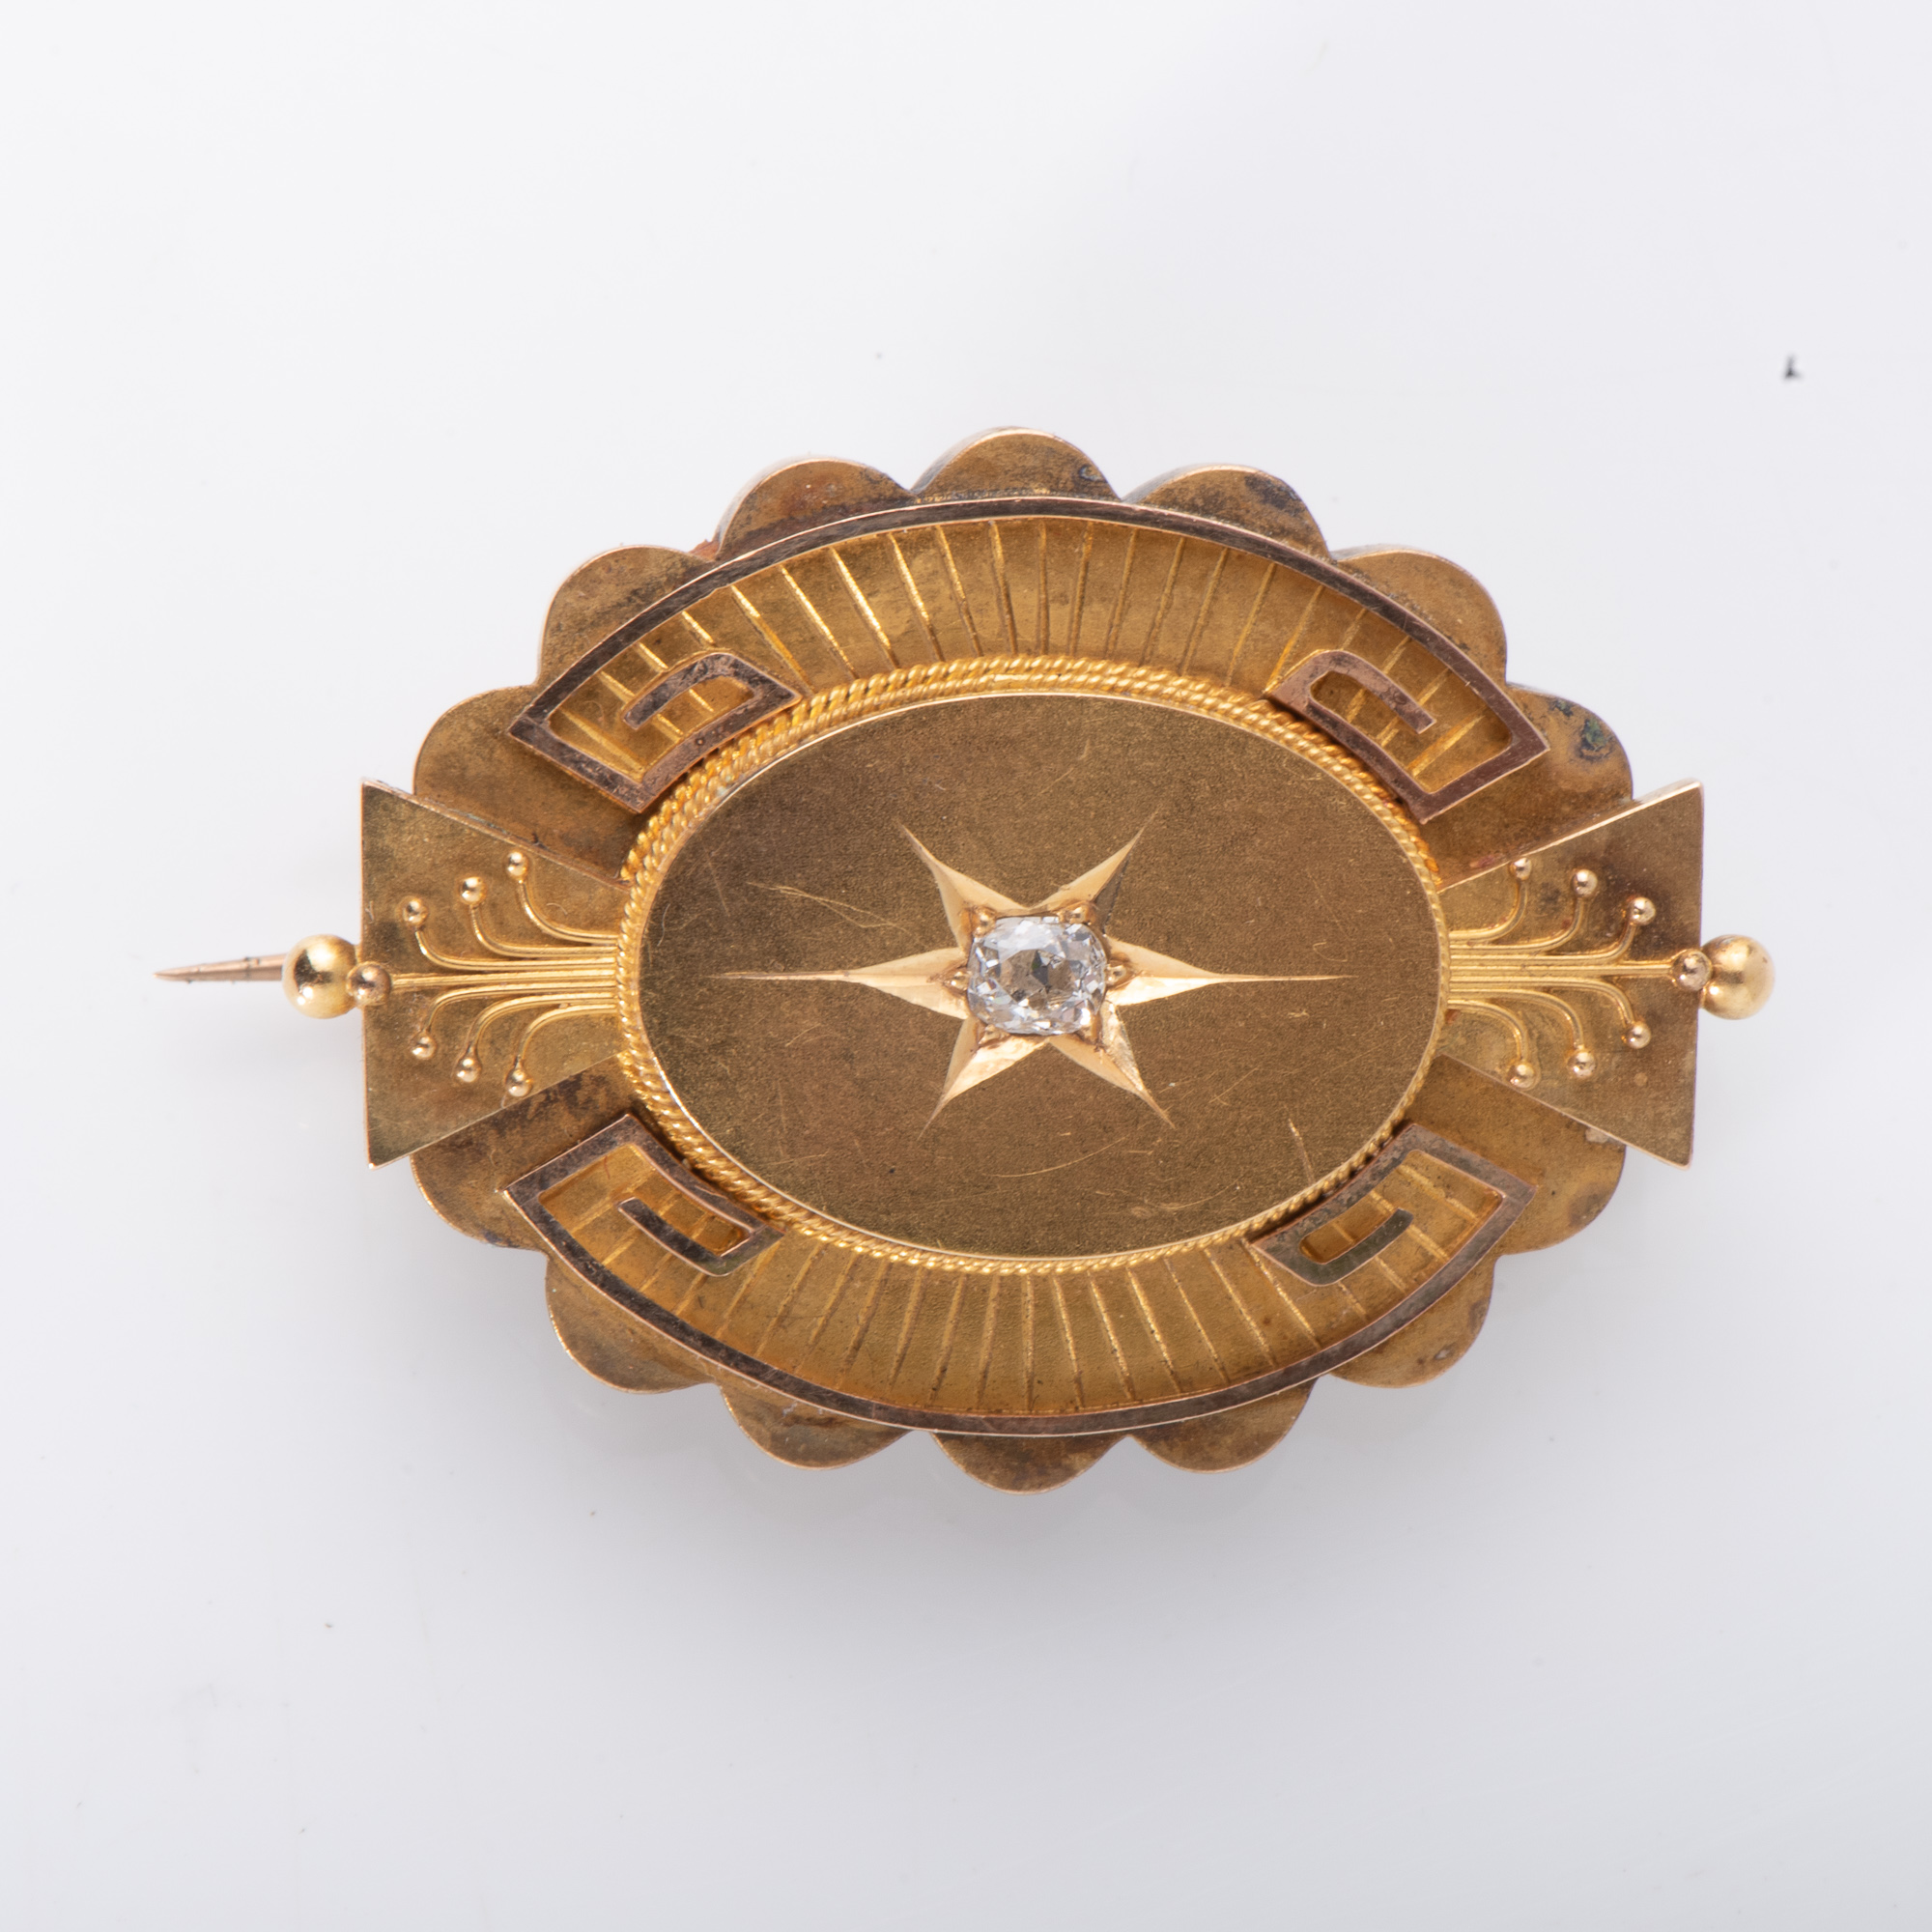 A 14CT GOLD BROOCH